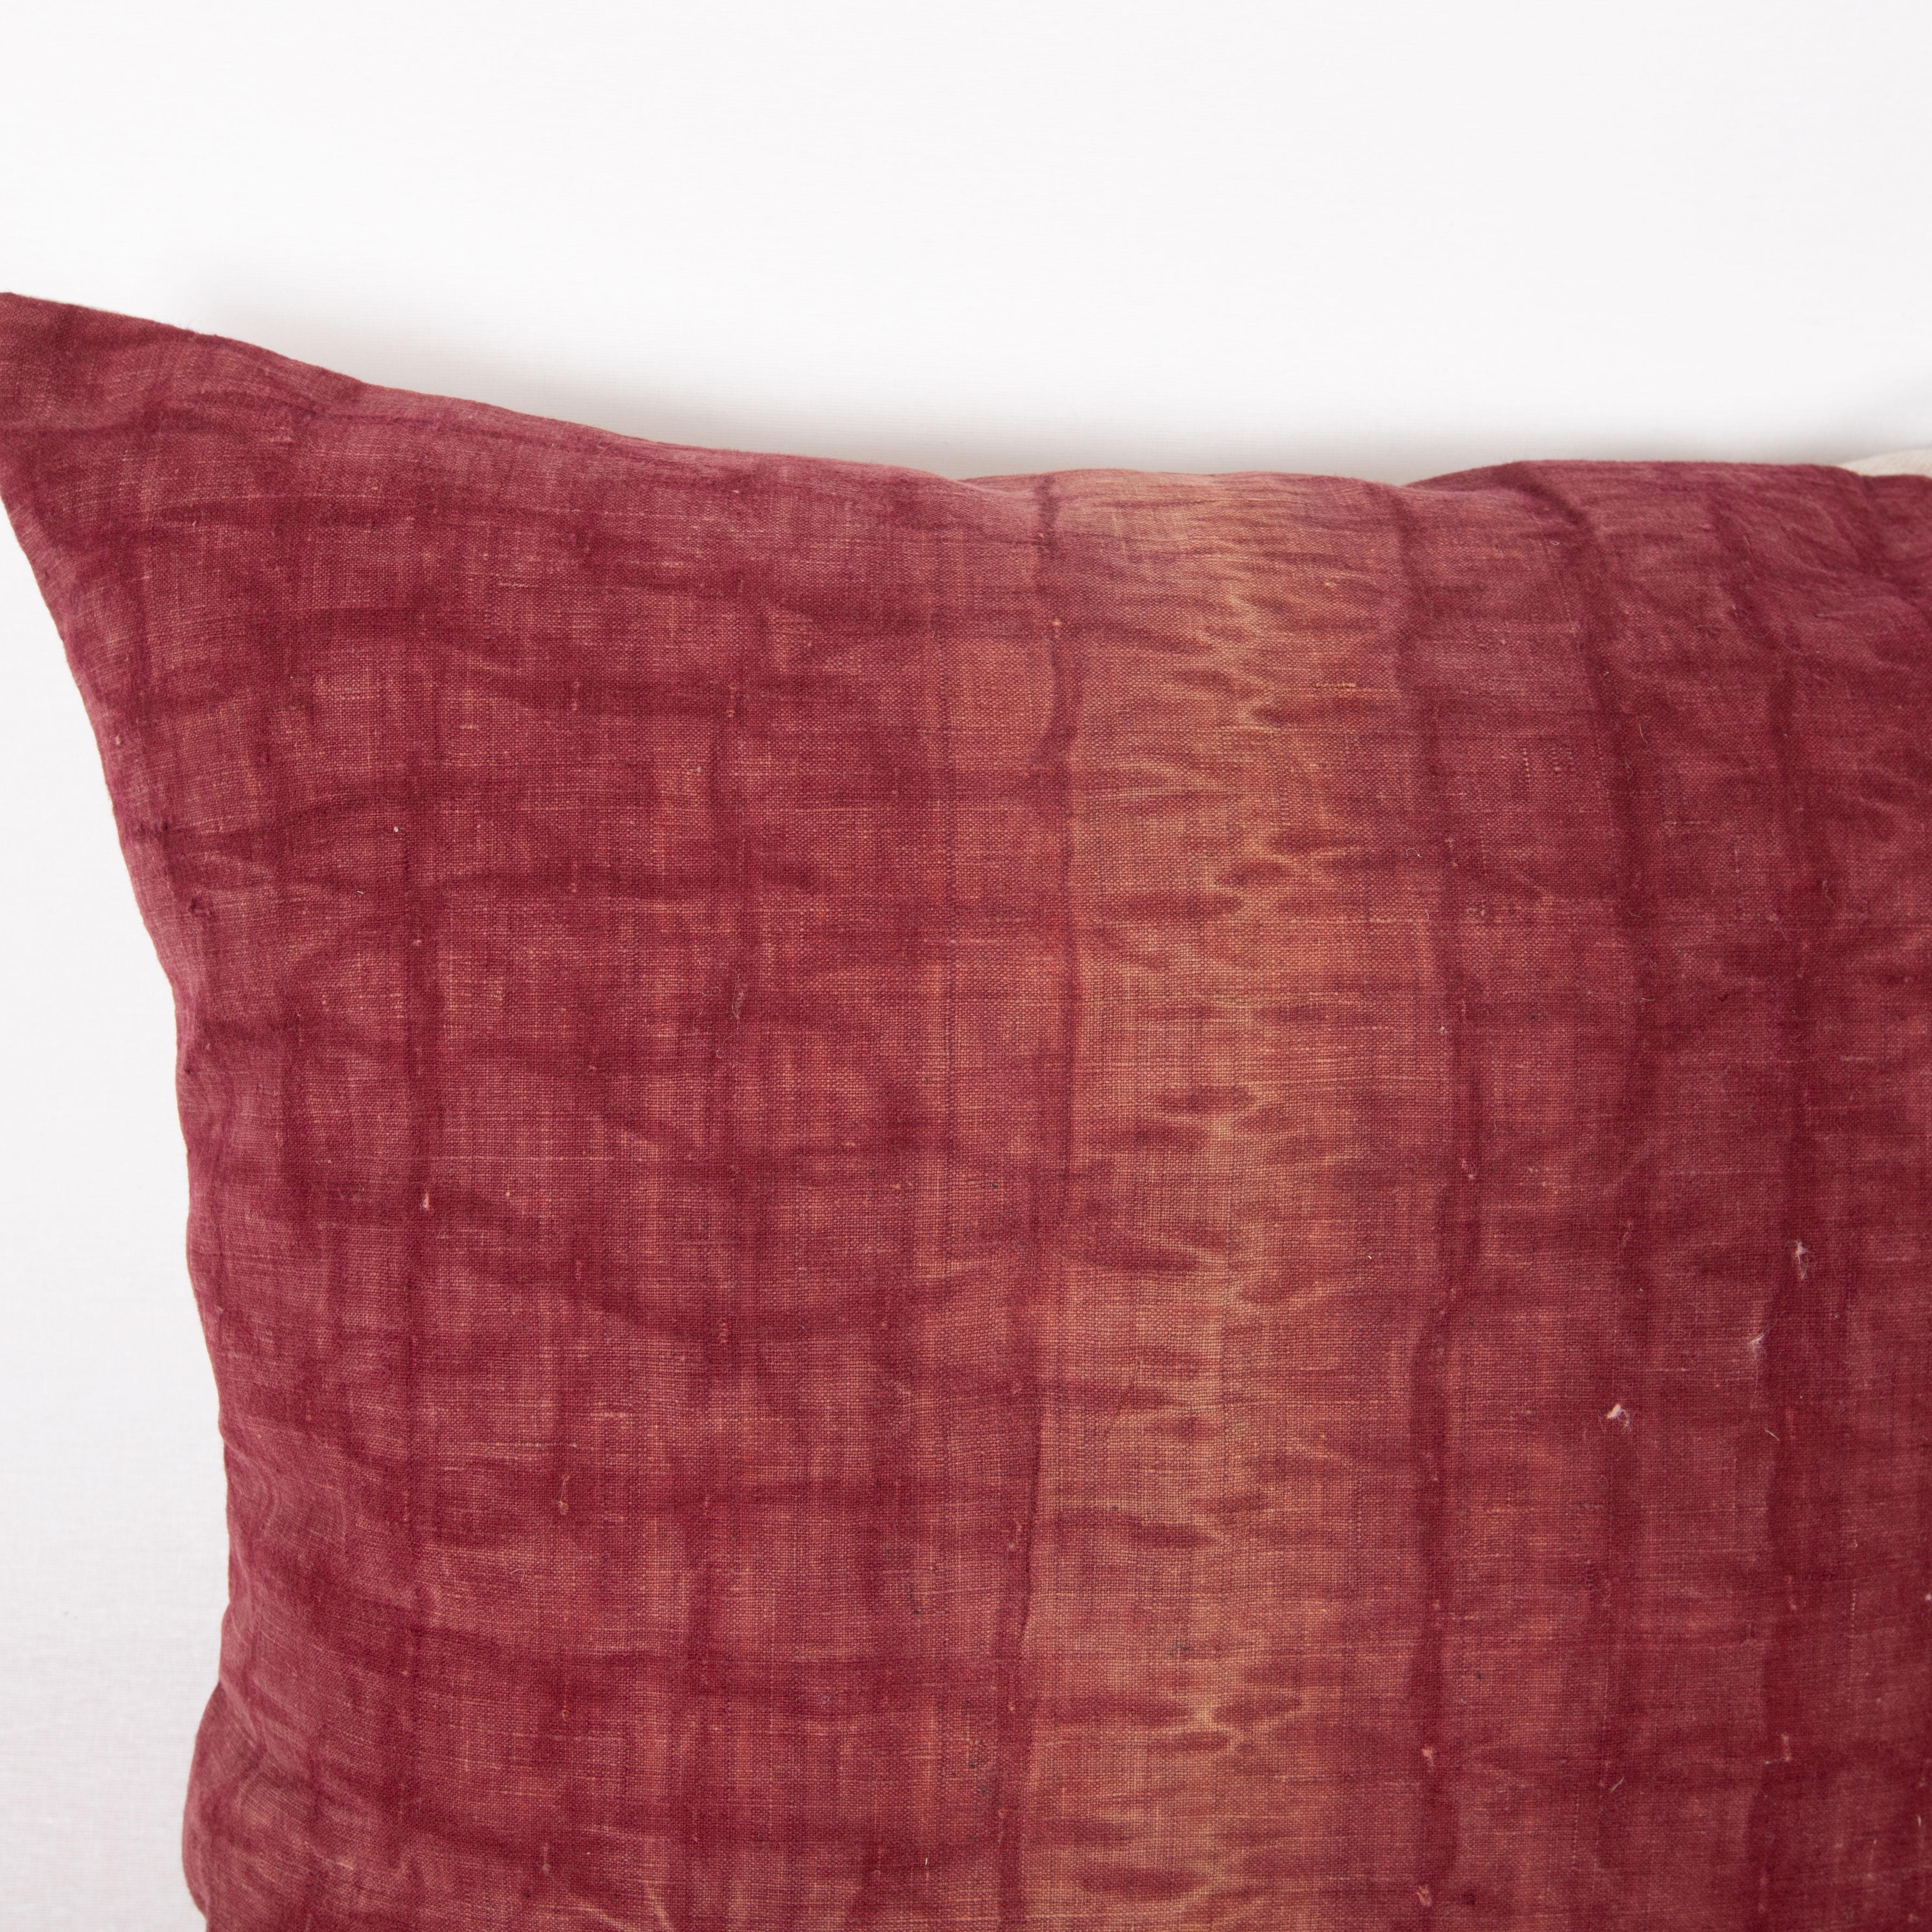 Hand-Woven Madder Red Pillow Cover Made from an Early 20th C. Quilt Top, Turkey For Sale